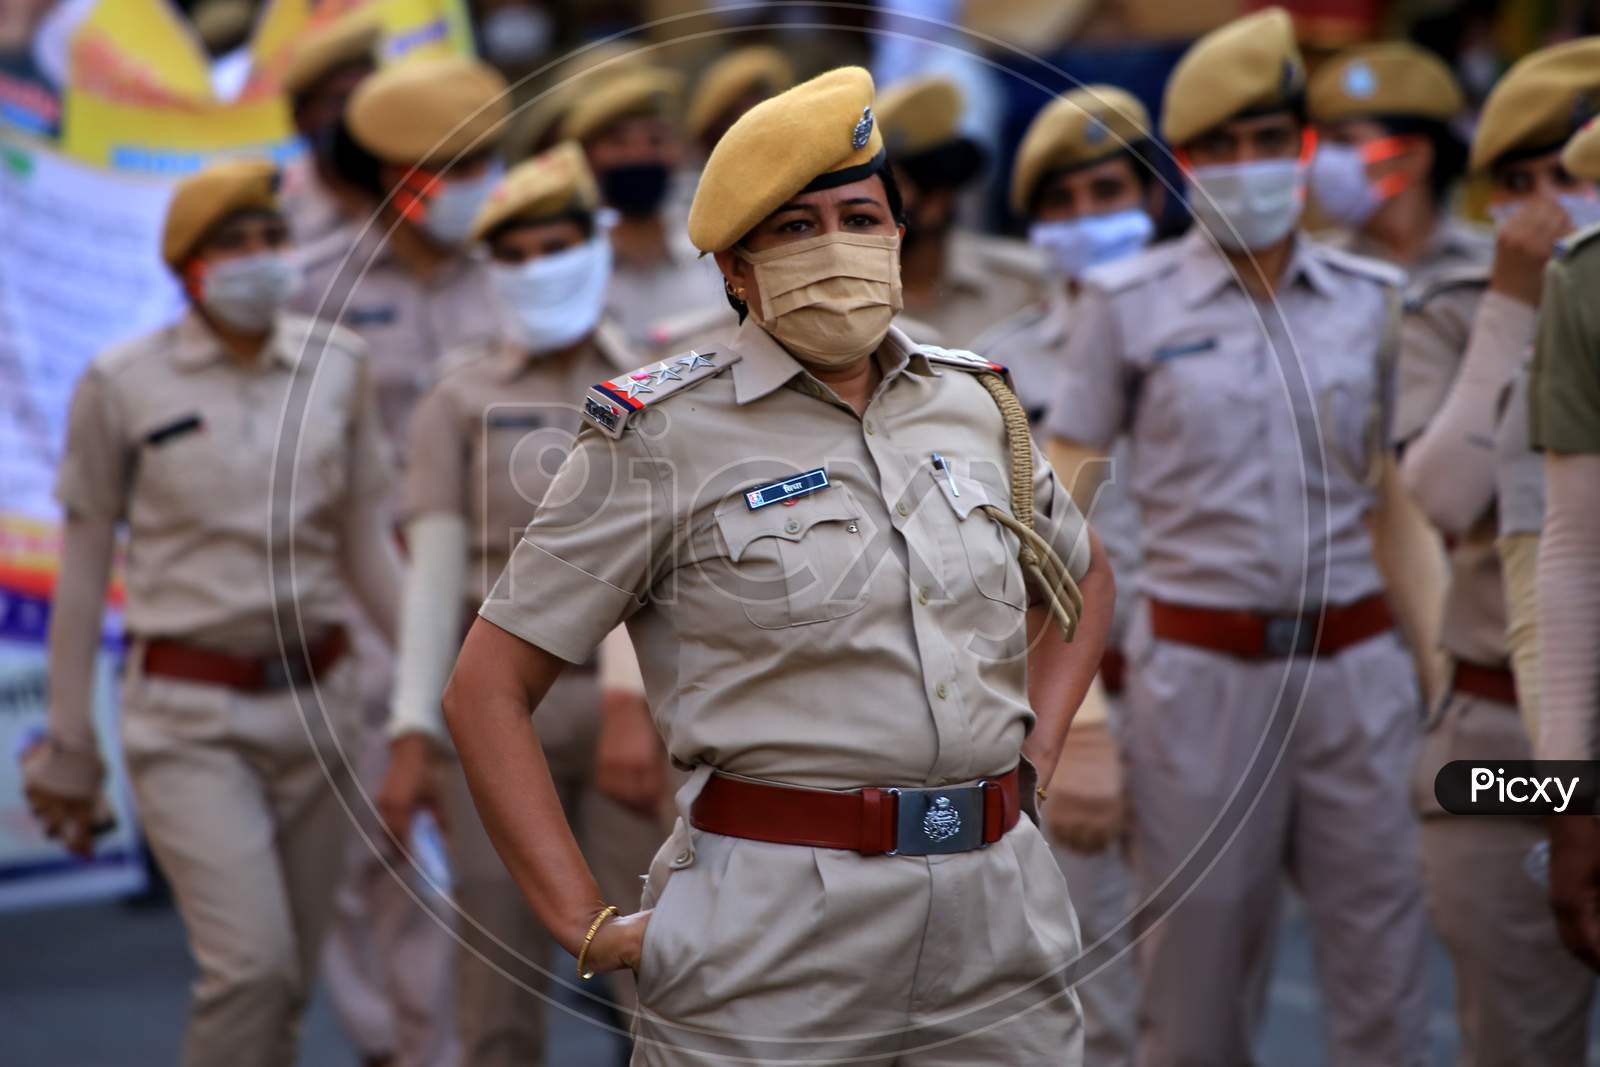 Women police officers participate in the flag march to spread awareness on Covid-19 in Ajmer, Rajasthan on July 02, 2020.